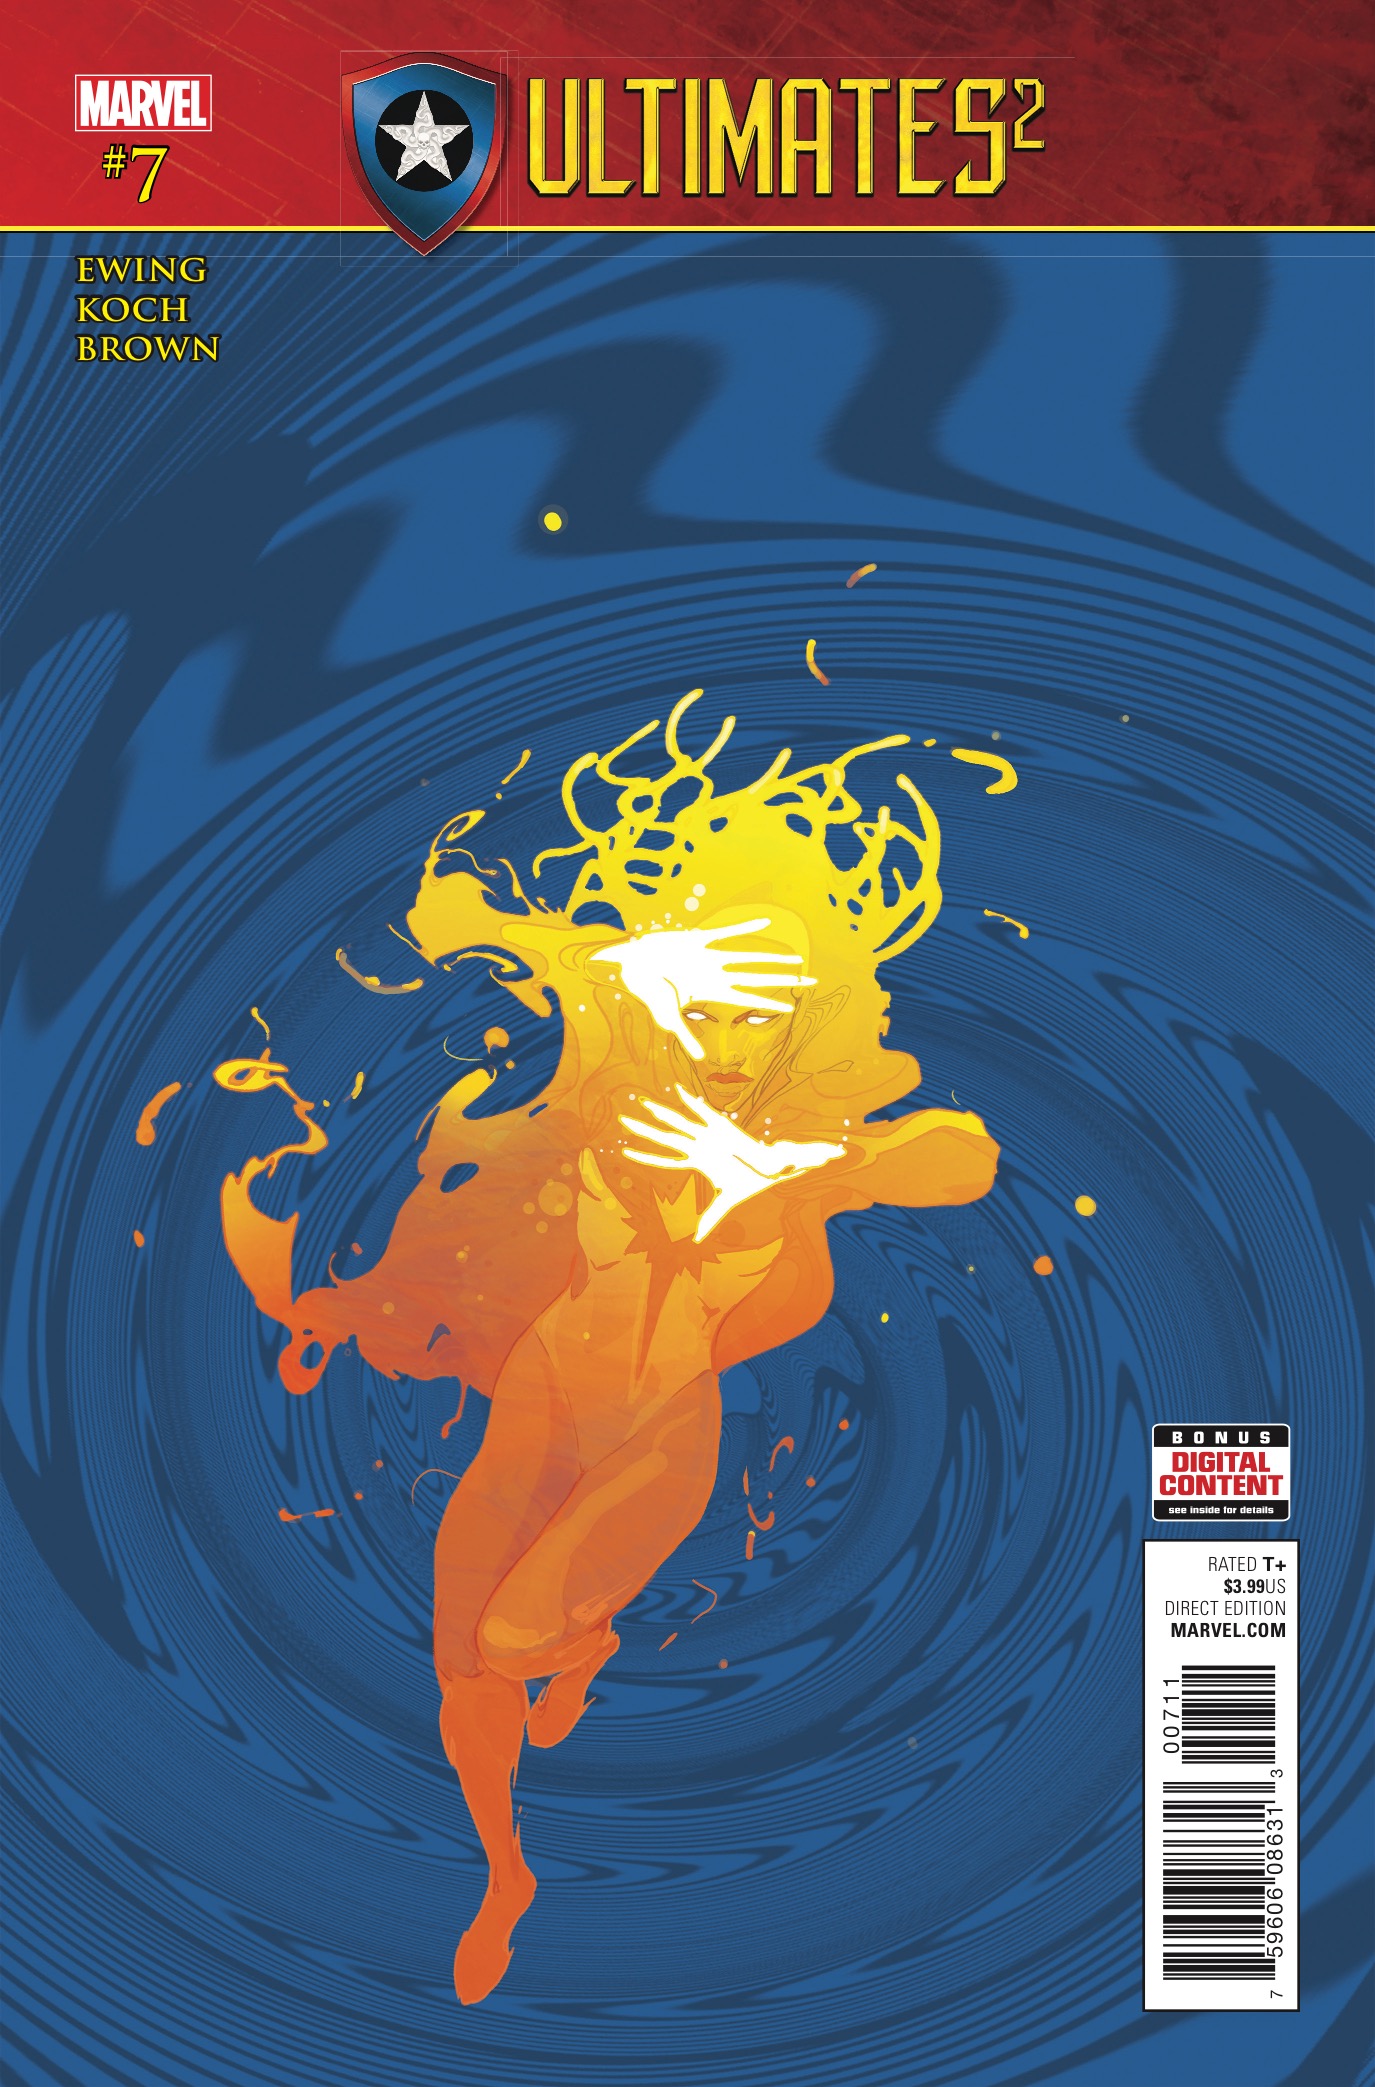 Marvel Preview: Ultimates 2 #7